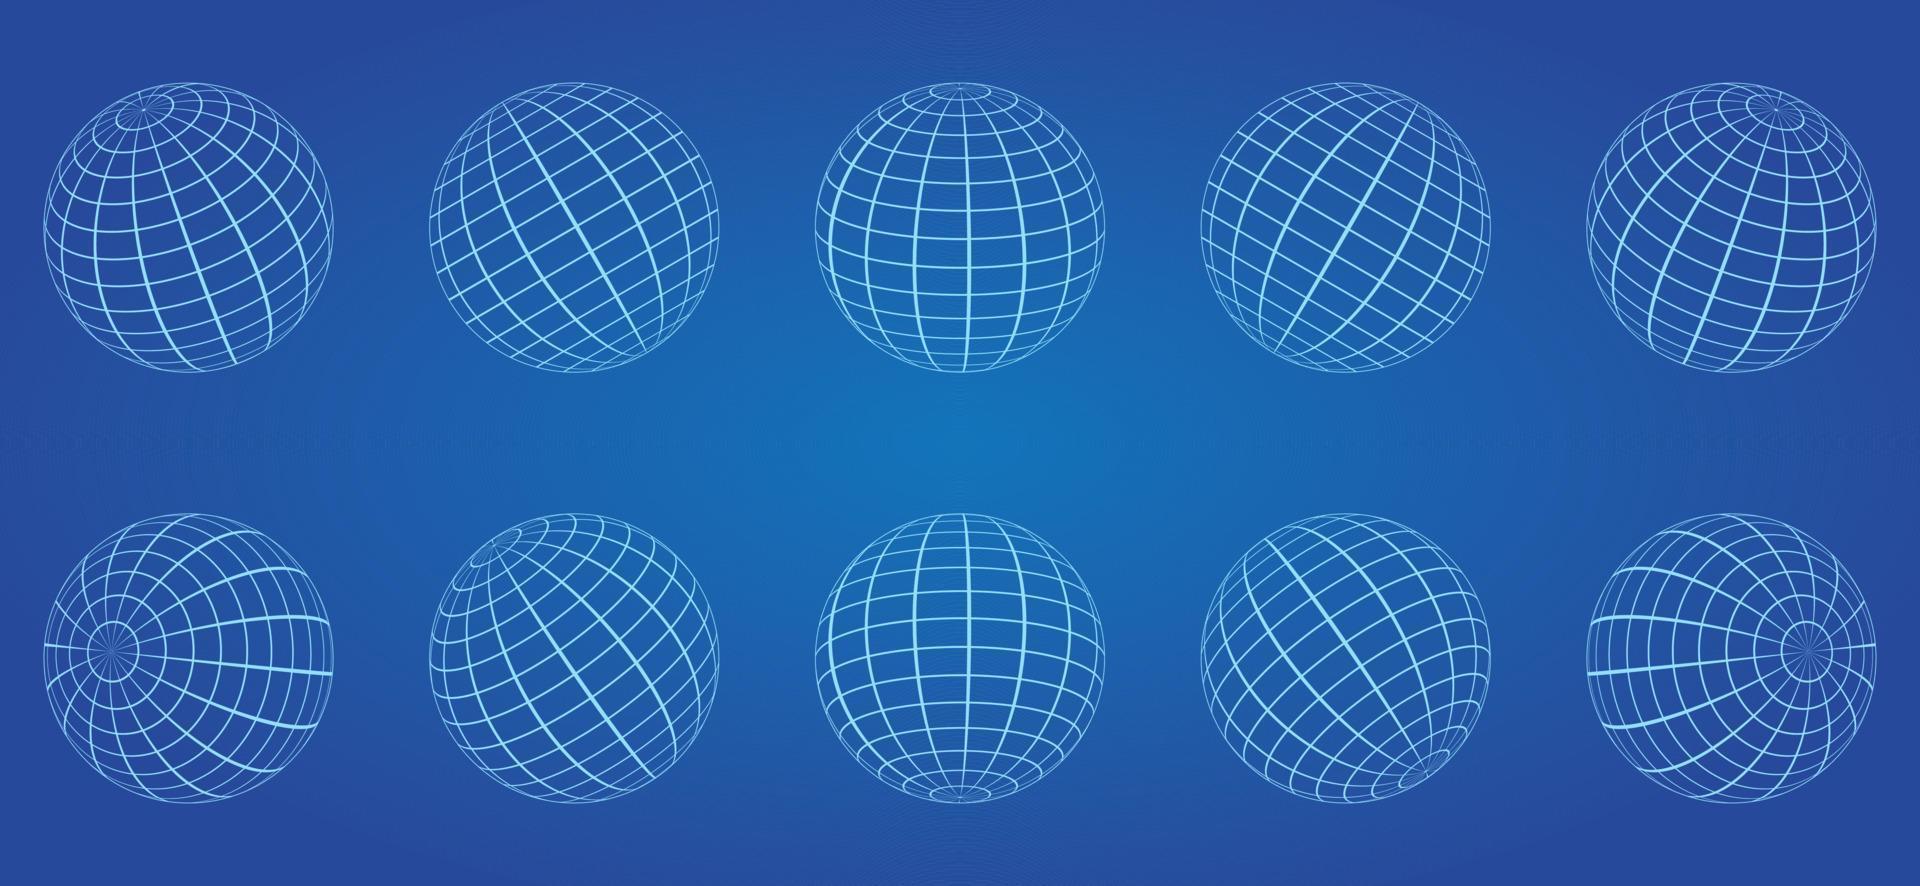 White Globe Grid Sphere Set on Blue Background. 3D Wire Global Earth Latitude, Longitude. Wired Line 3D Planet Globe. Geometric Round Grid Mesh Ball. Wireframe Globe Surface. Isolated Vector. vector